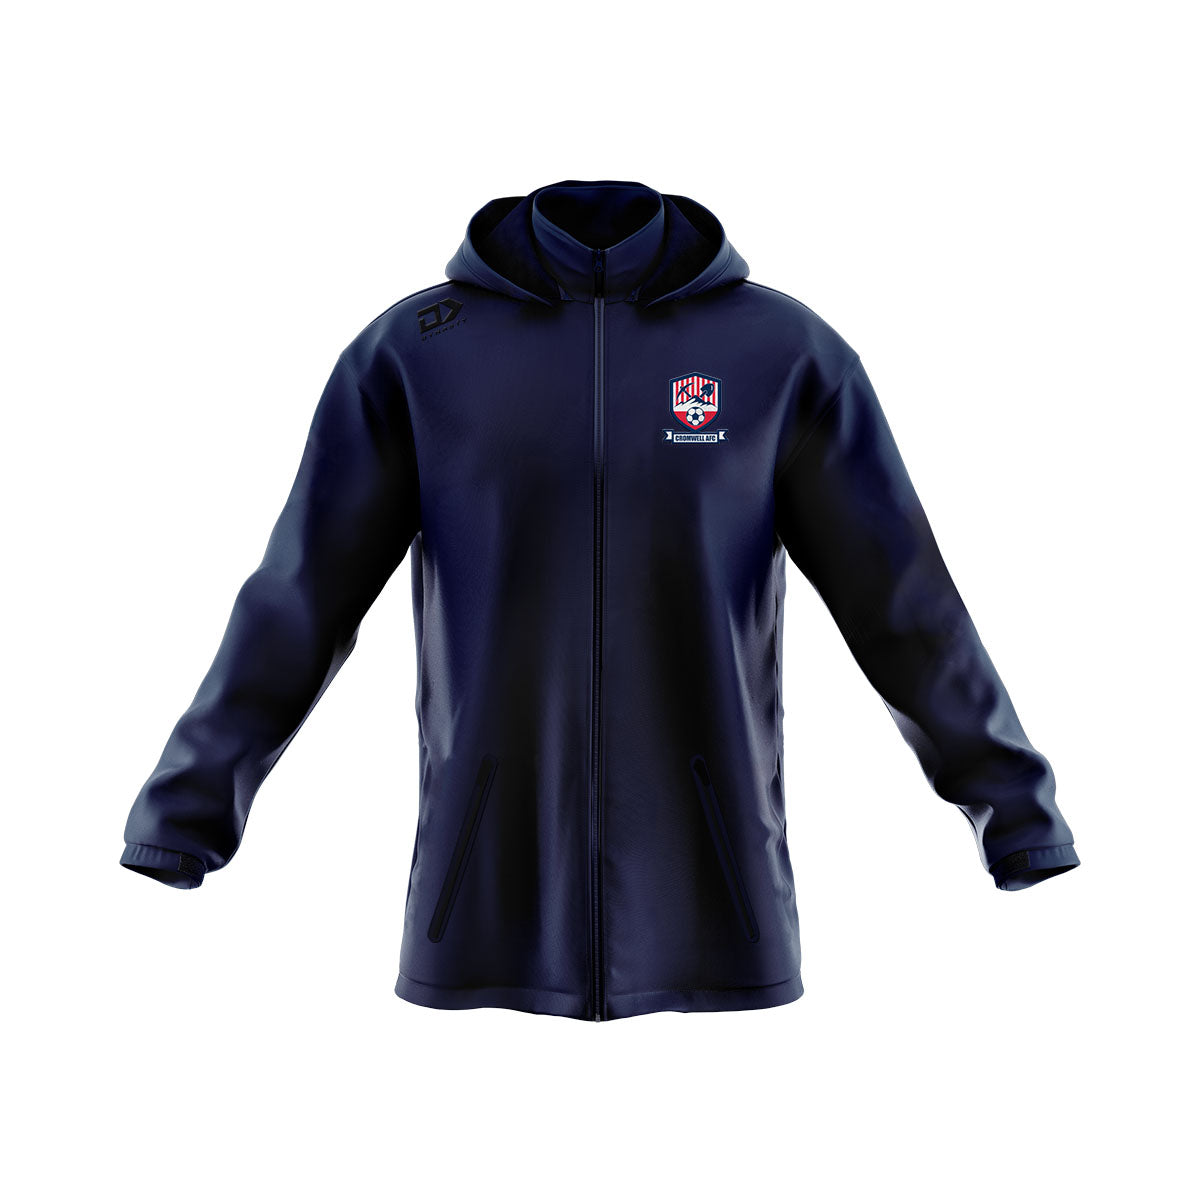 Cromwell AFC Junior Wet Weather Jacket